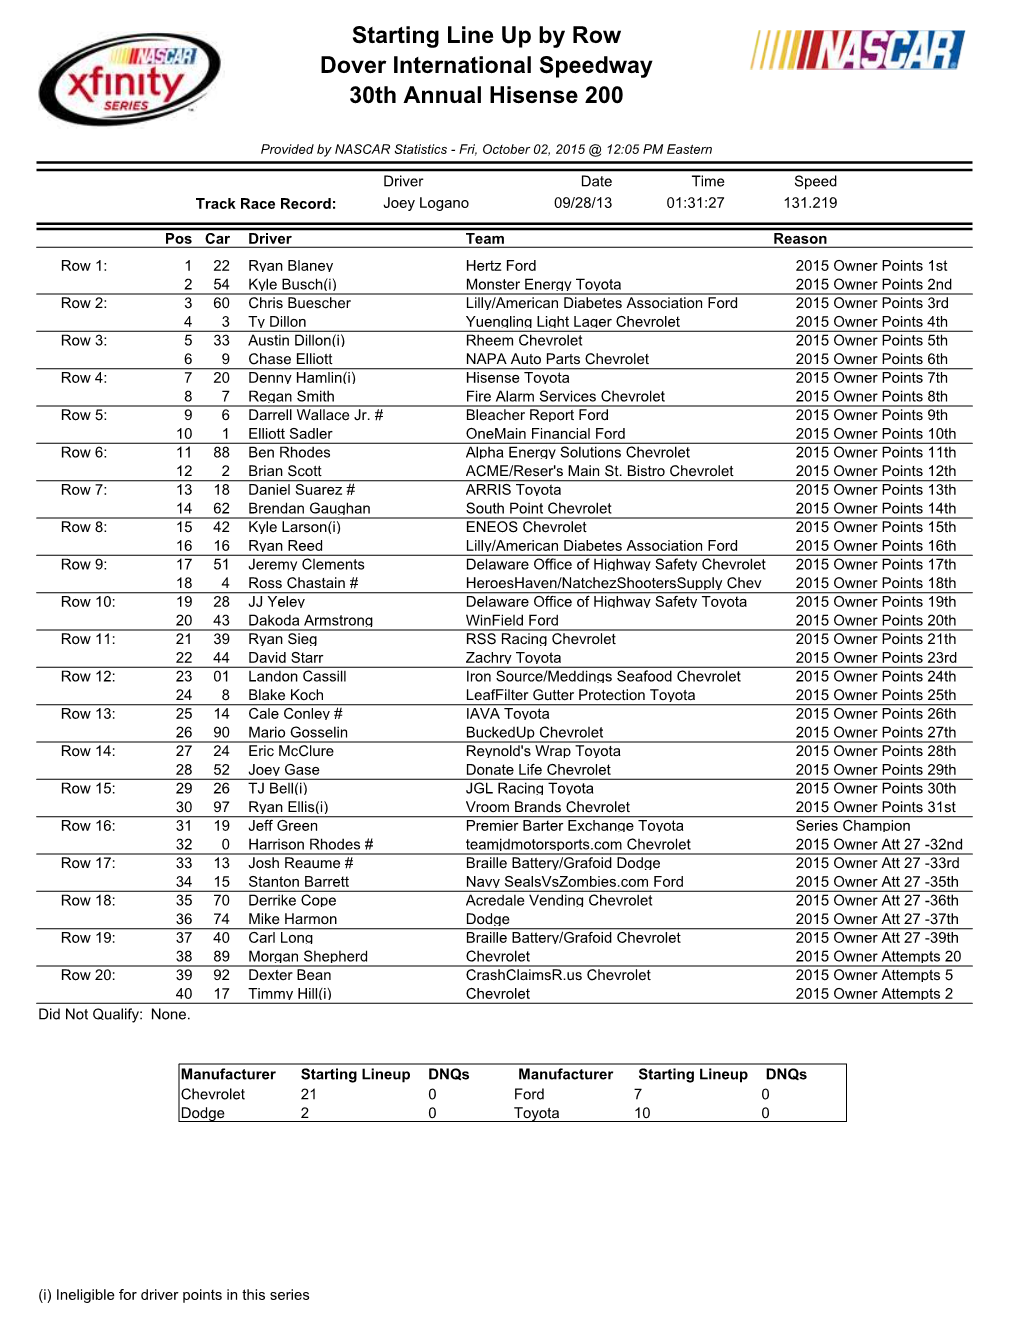 Starting Line up by Row Dover International Speedway 30Th Annual Hisense 200